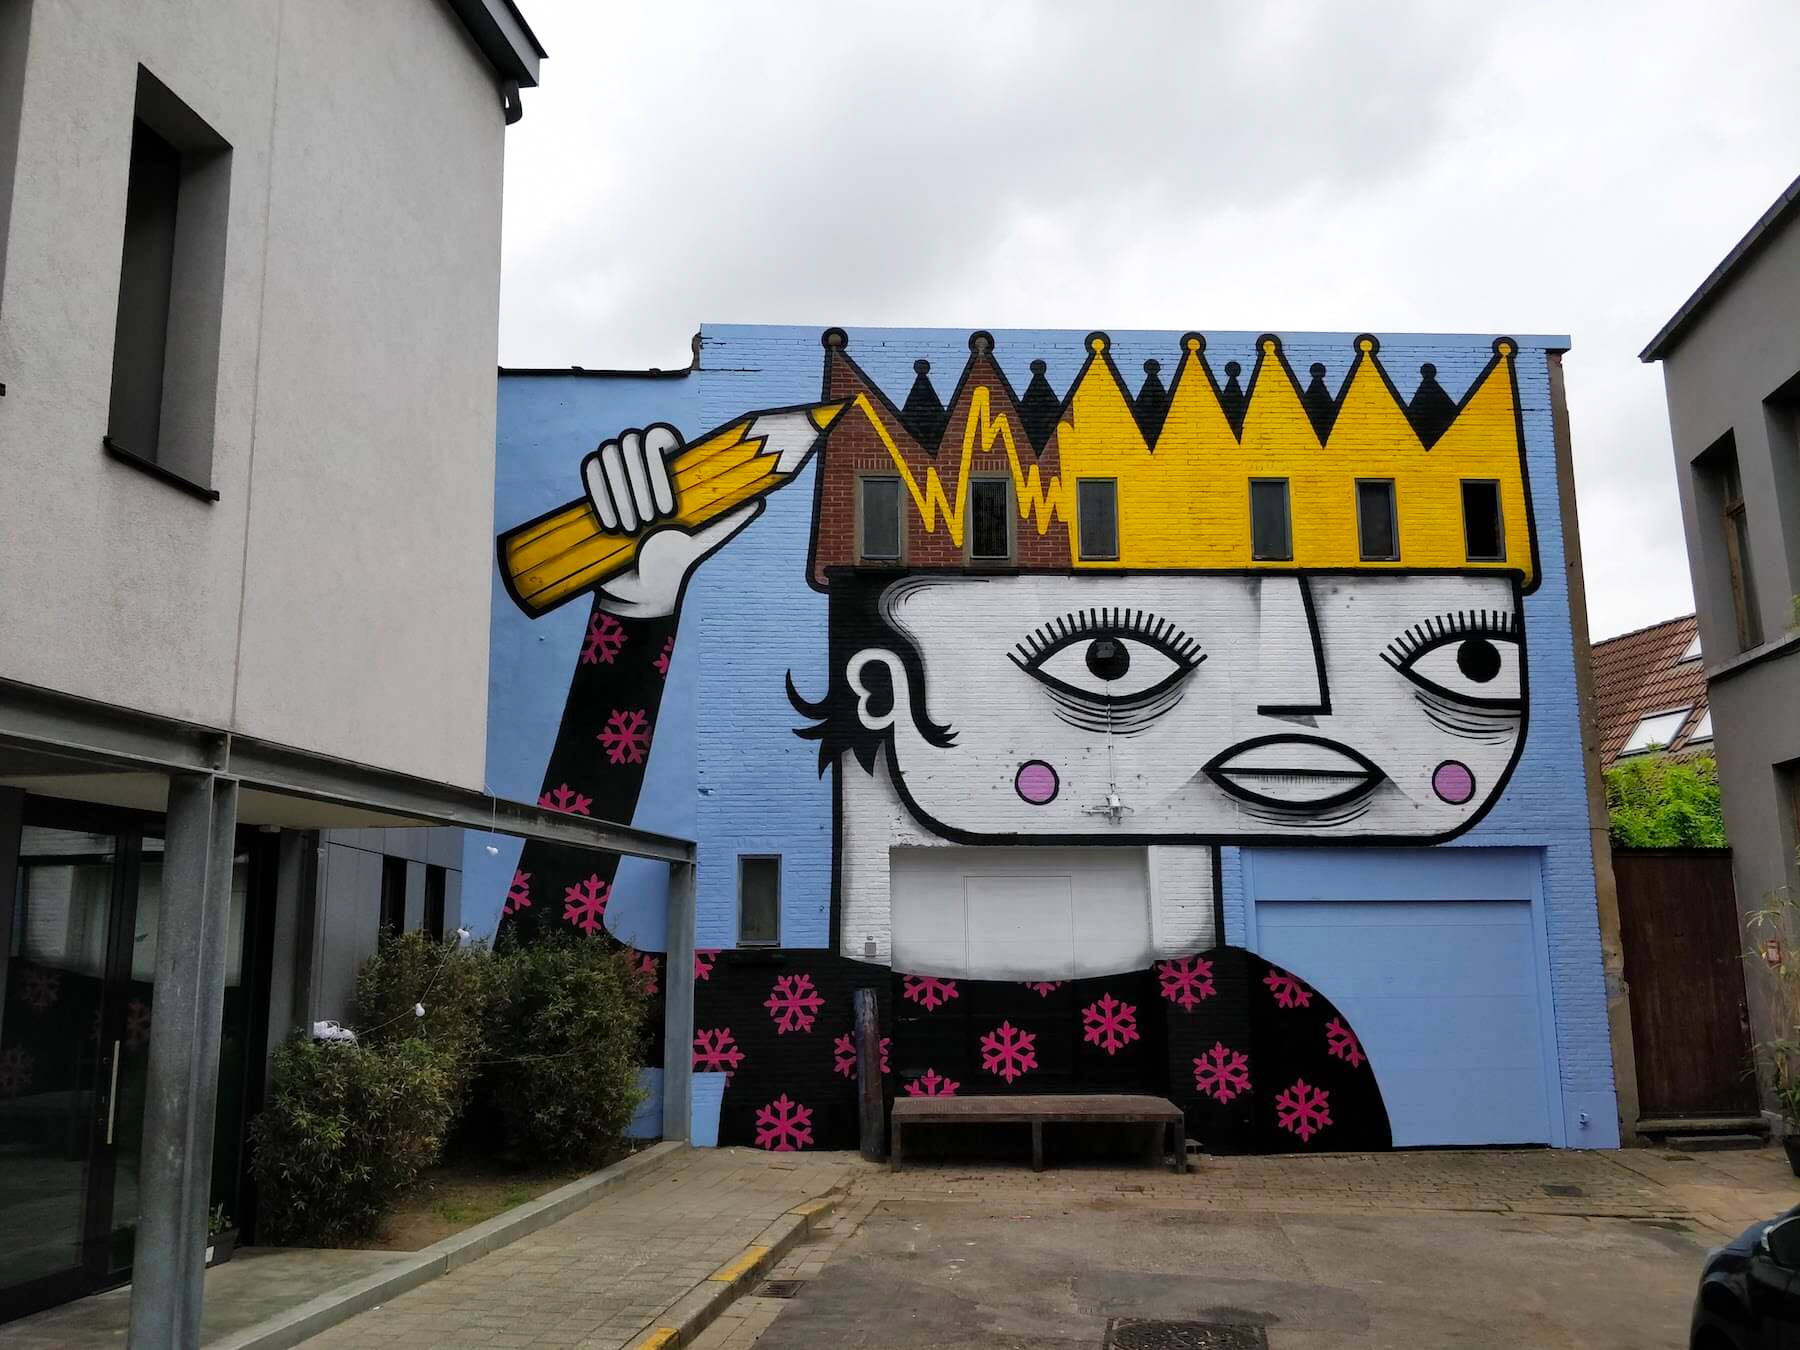 Playful Illustrative Characters Span Brightly Painted Walls by Joachim